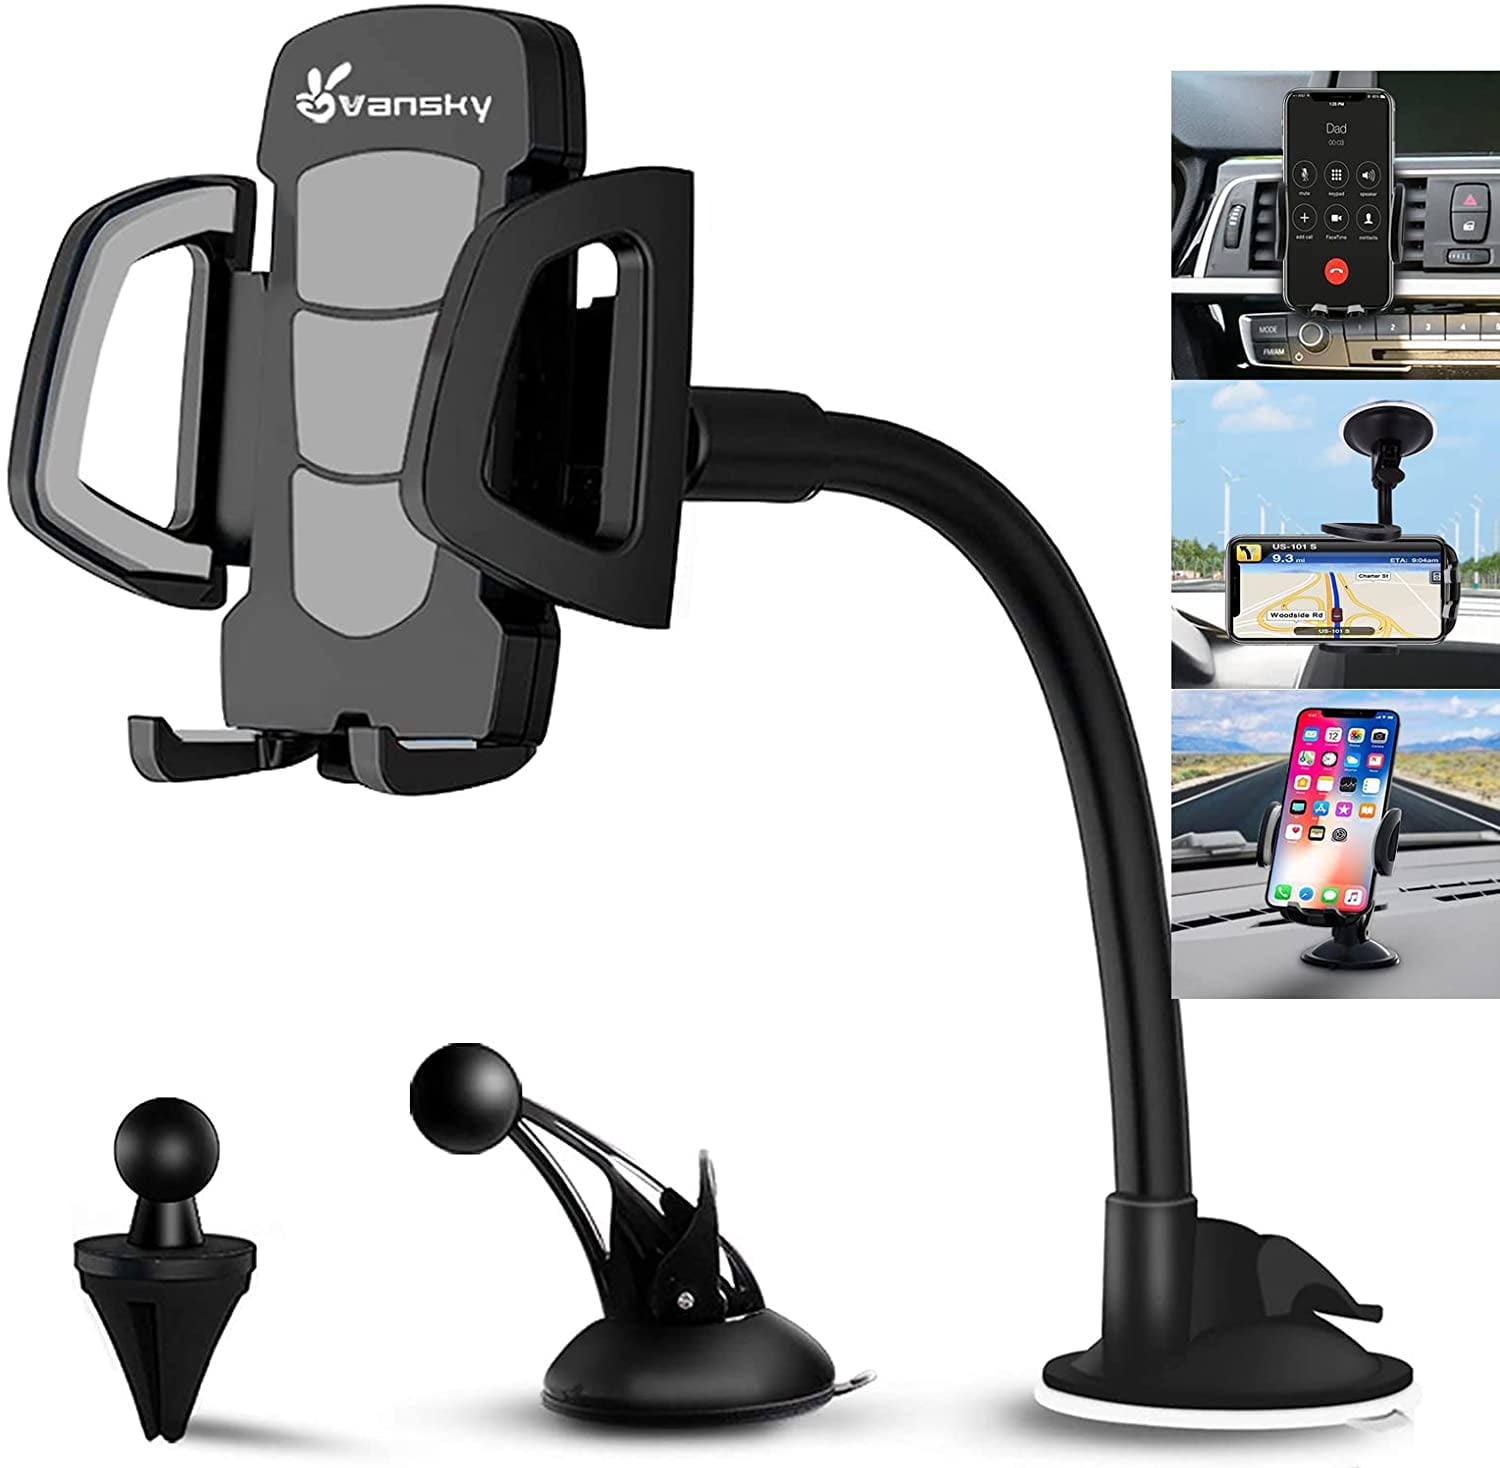 Qifutan Car Phone Holder Mount Phone Mount for Car Windshield Dashboard Air  Vent Universal Hands Free Automobile Cell Phone Holder Fit iPhone